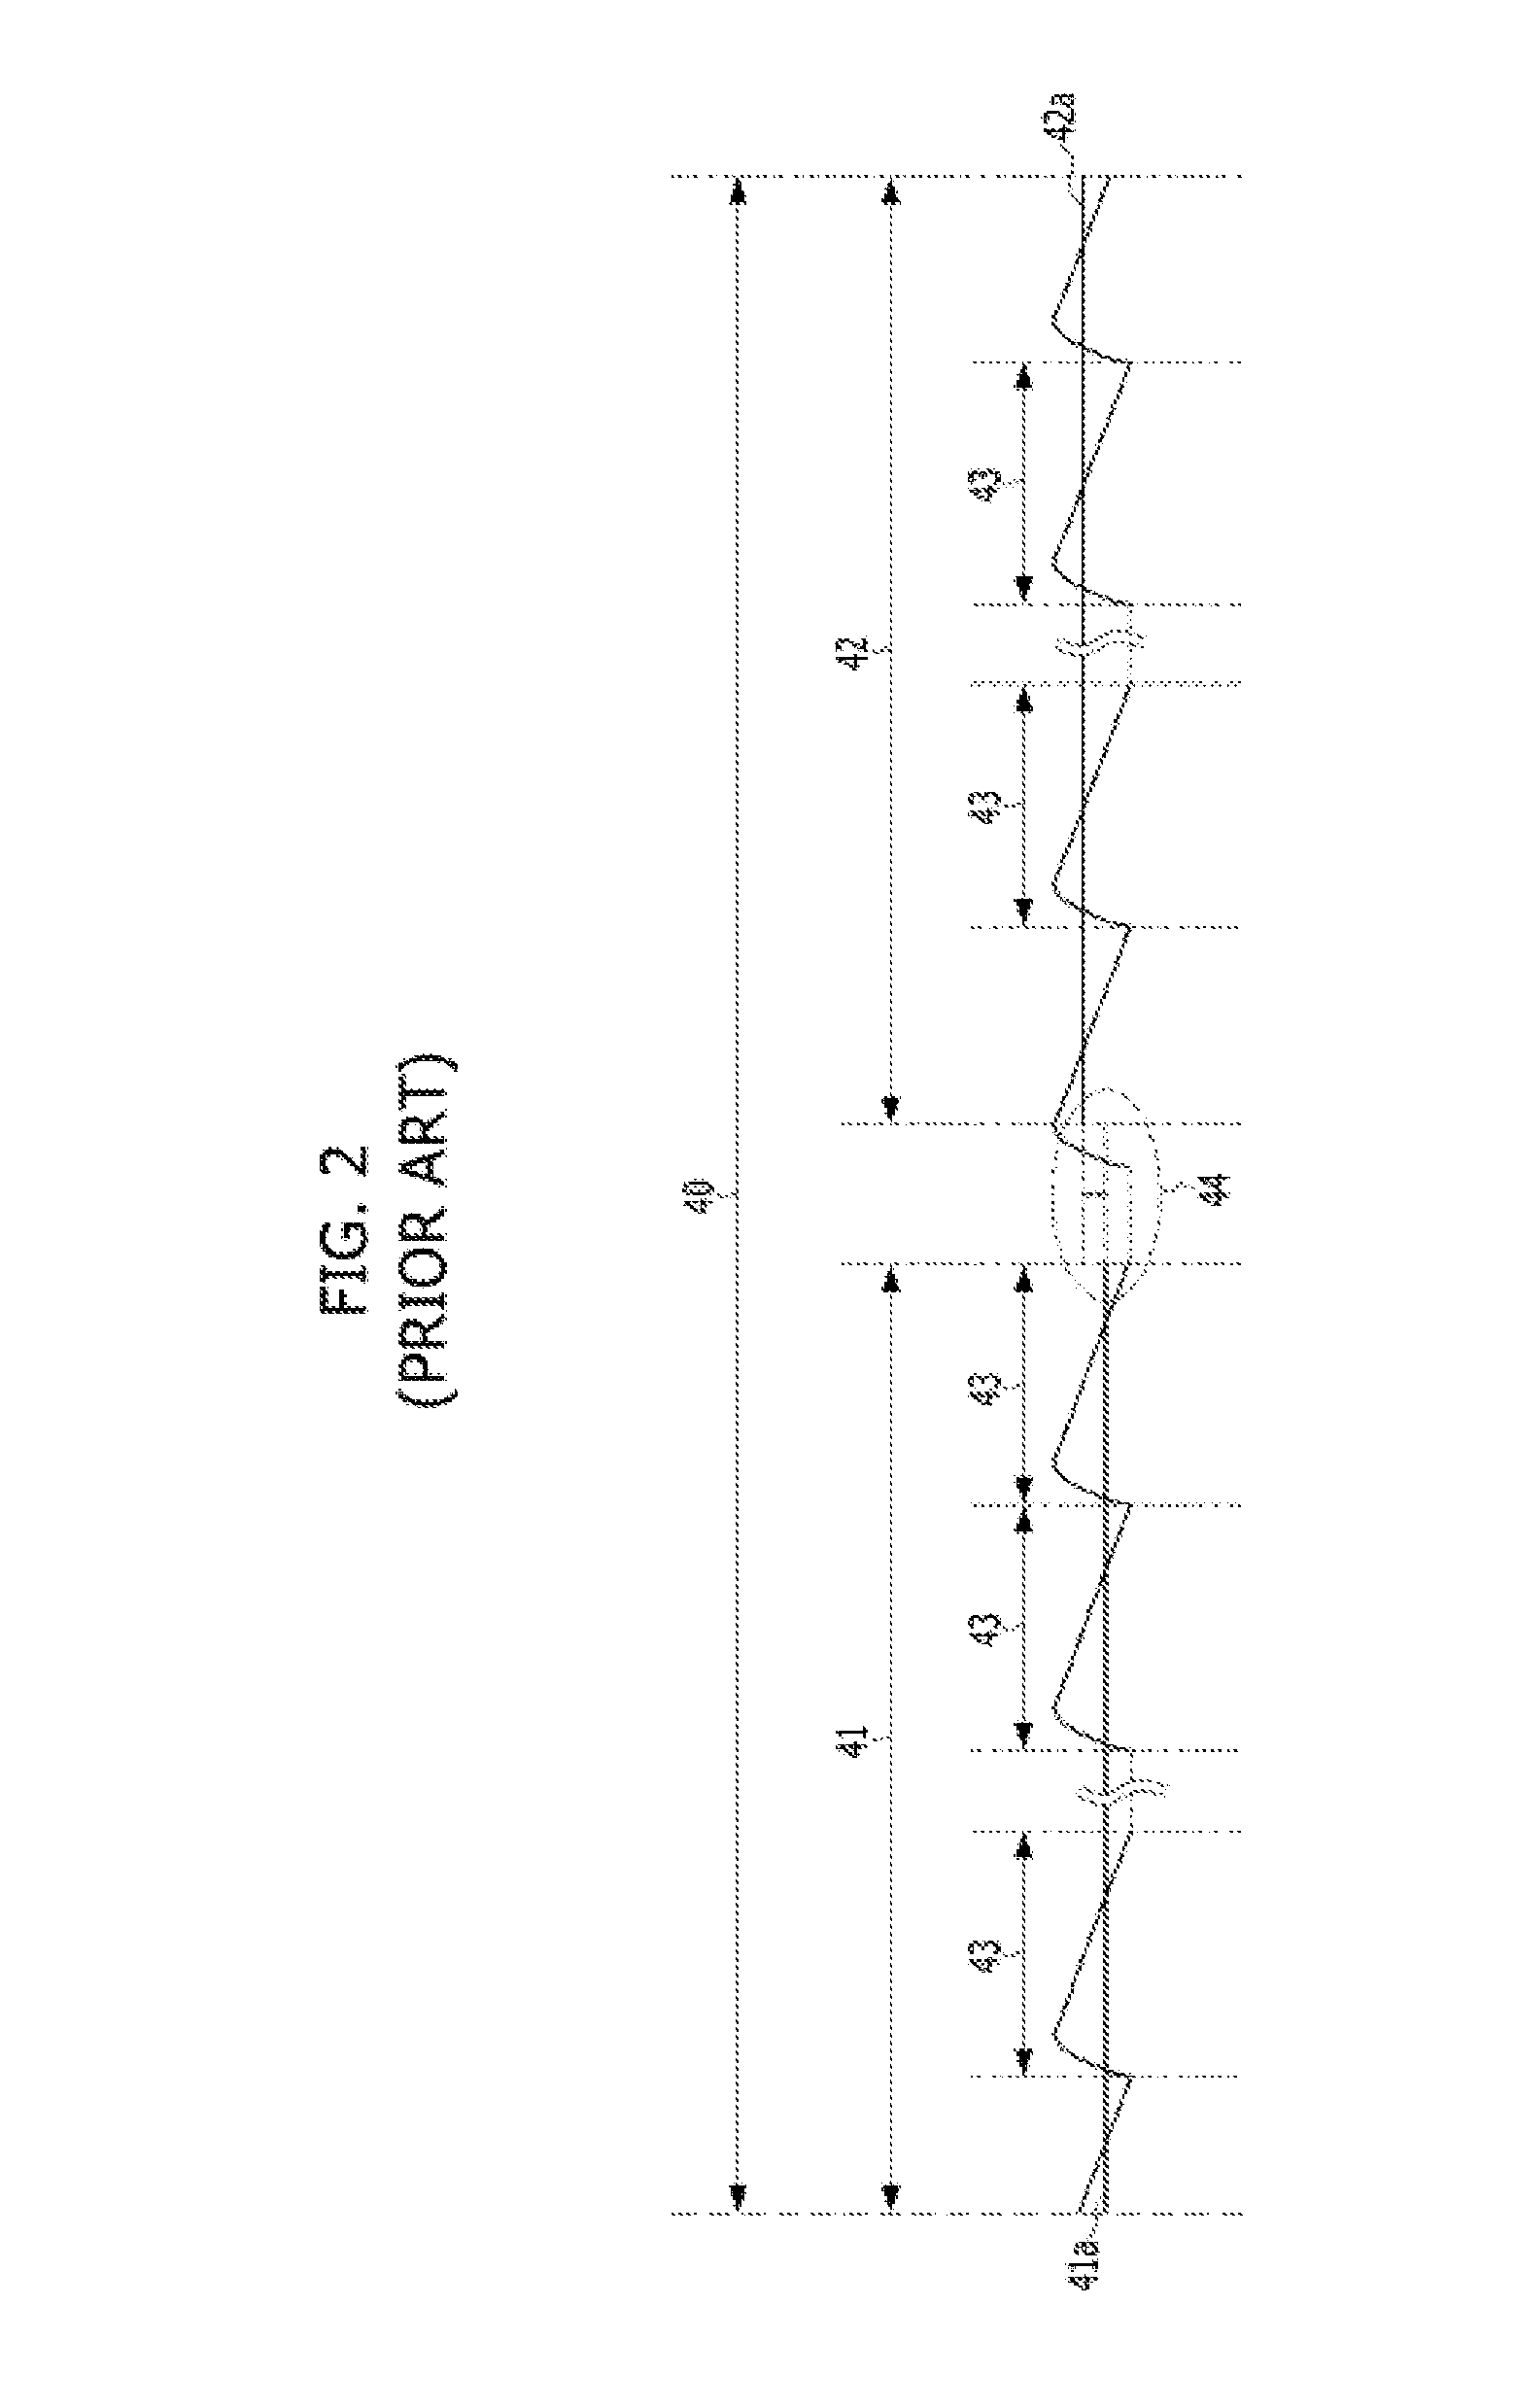 Power switching circuit and method for controlling same